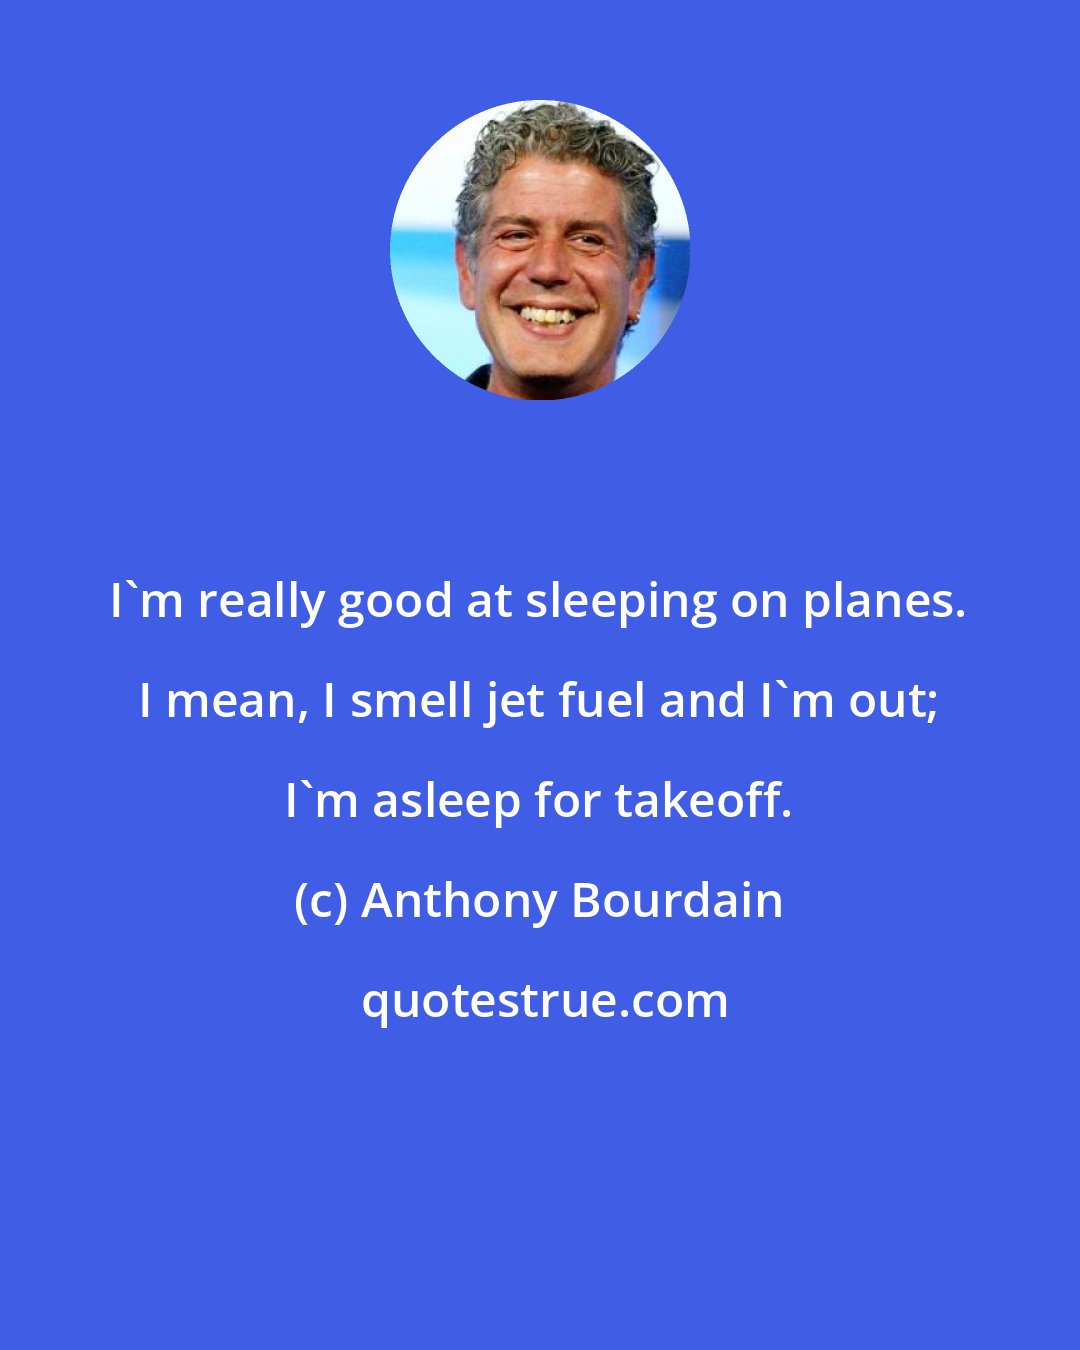 Anthony Bourdain: I'm really good at sleeping on planes. I mean, I smell jet fuel and I'm out; I'm asleep for takeoff.